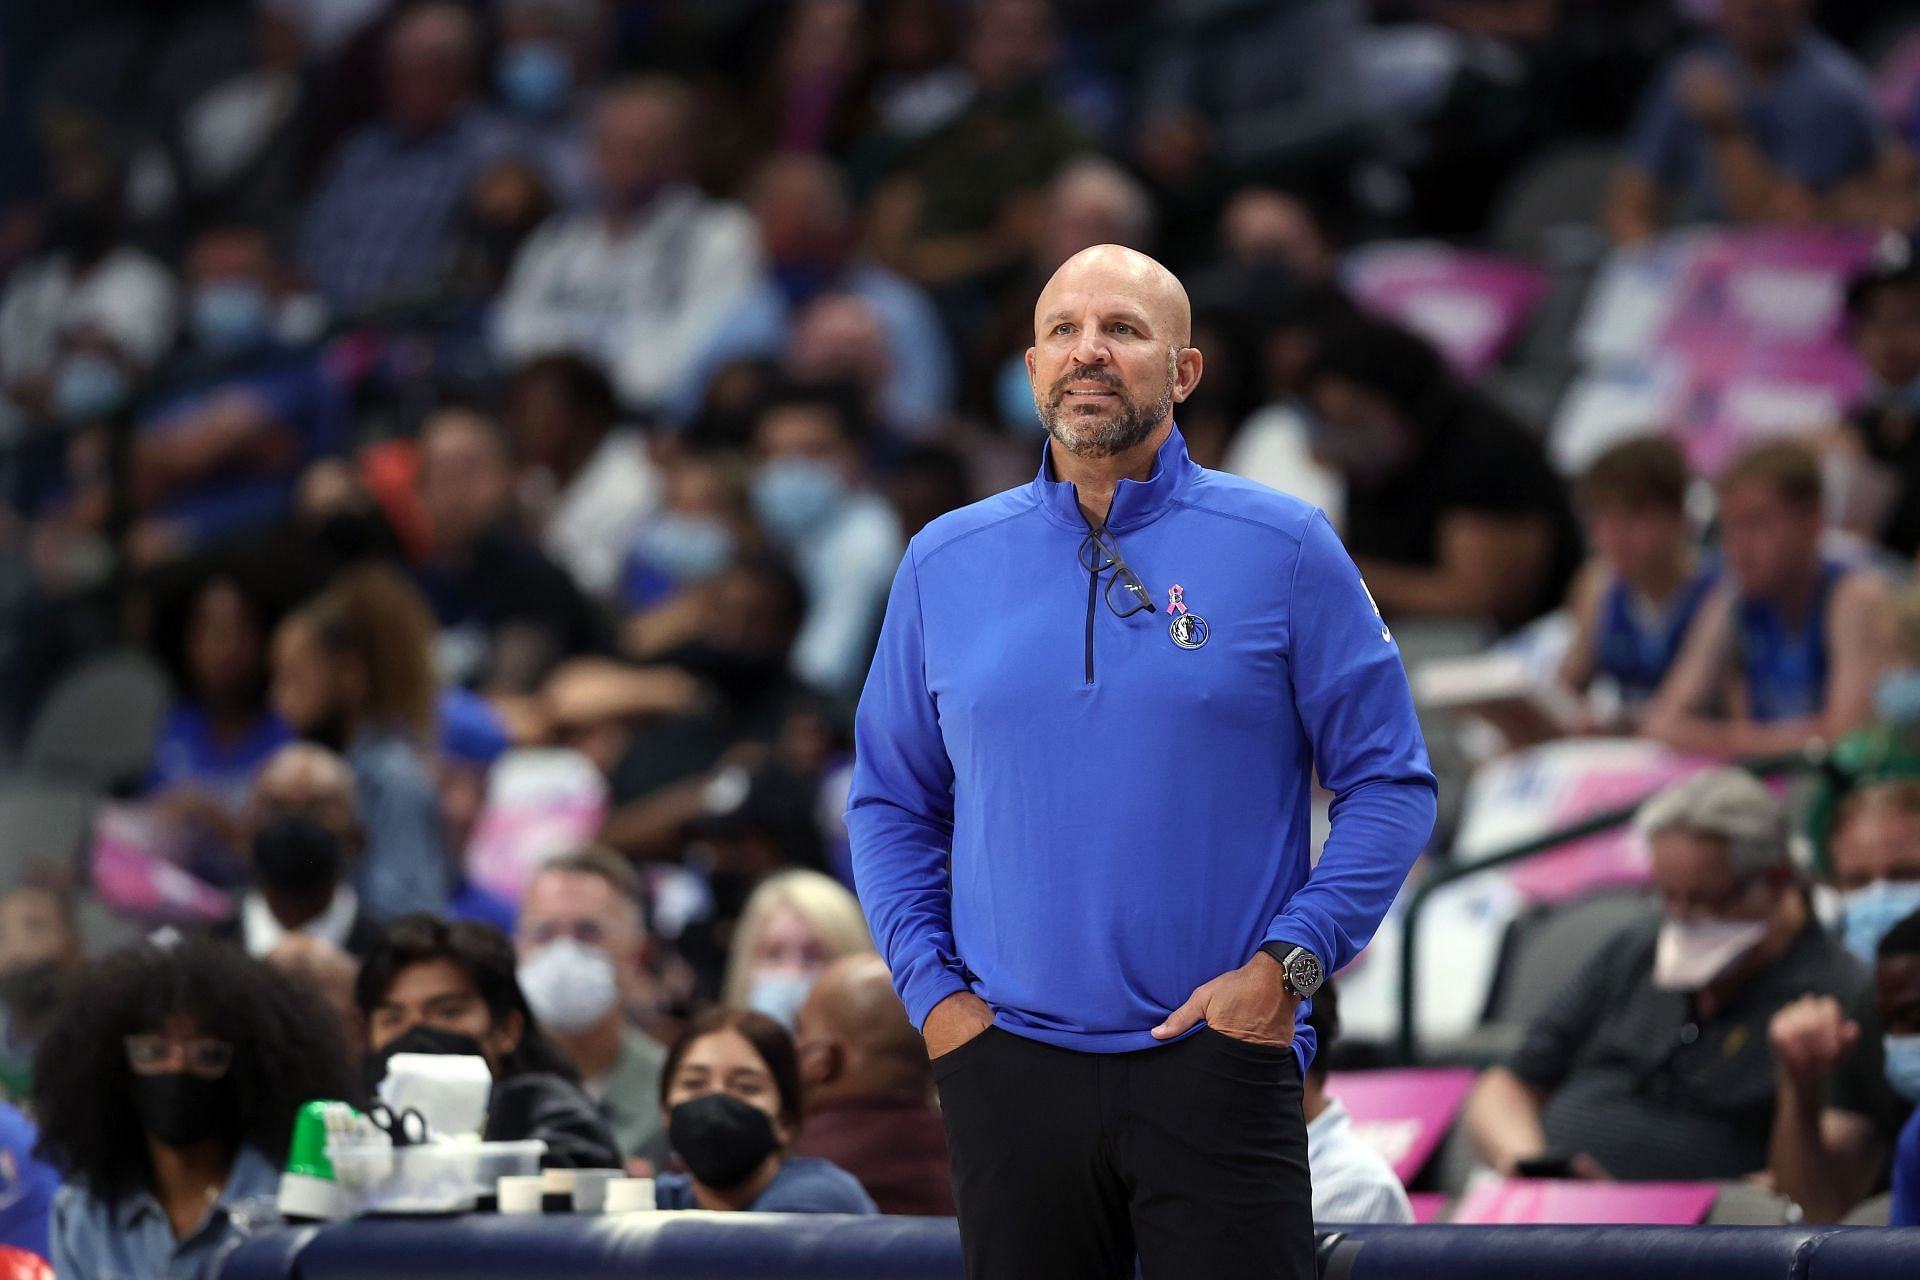 Jason Kidd is the new man in charge for the Dallas Mavericks